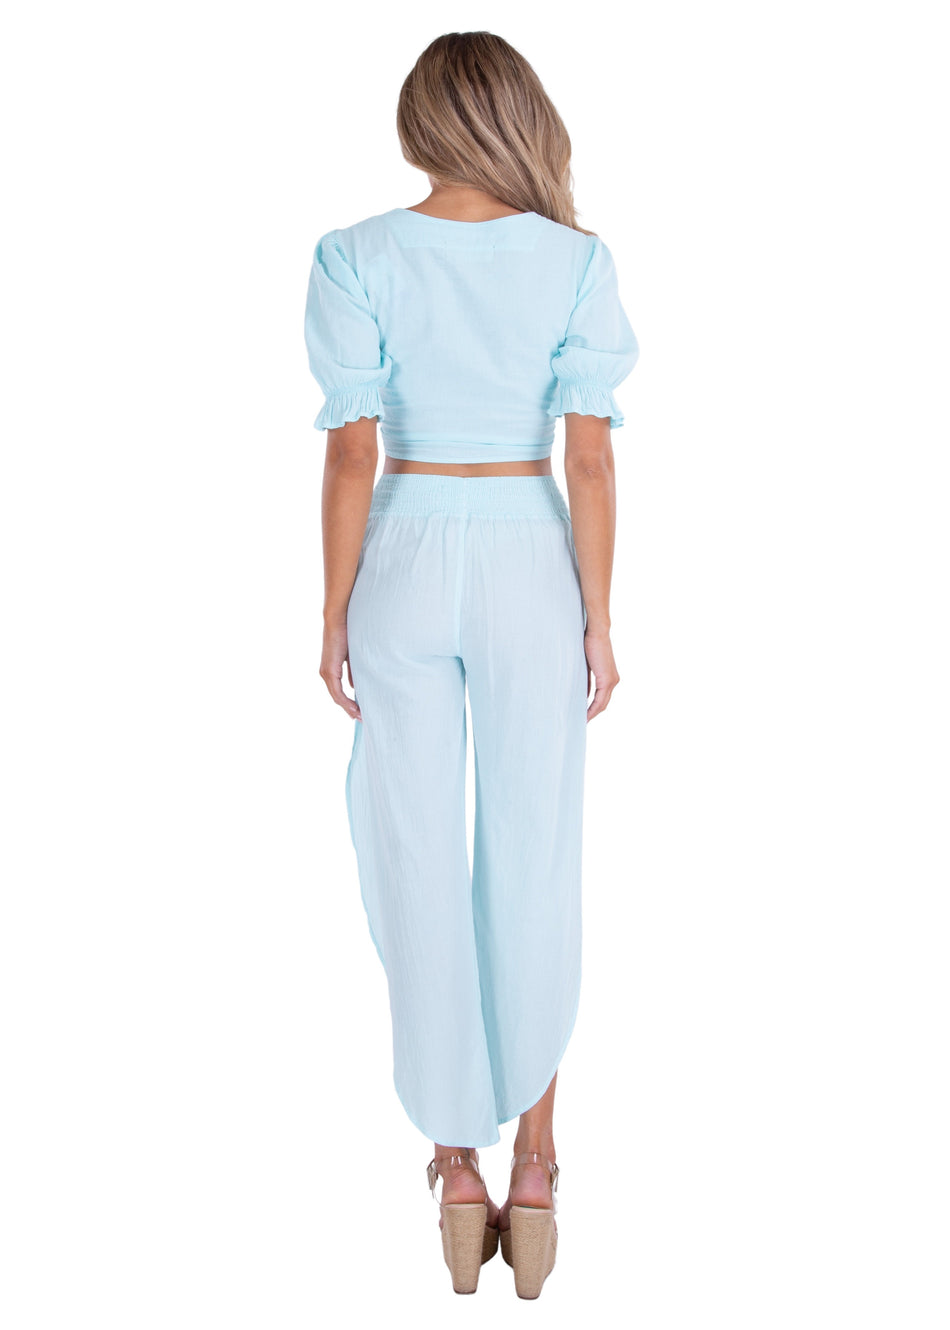 NW1348 - Baby Turquoise Cotton Top